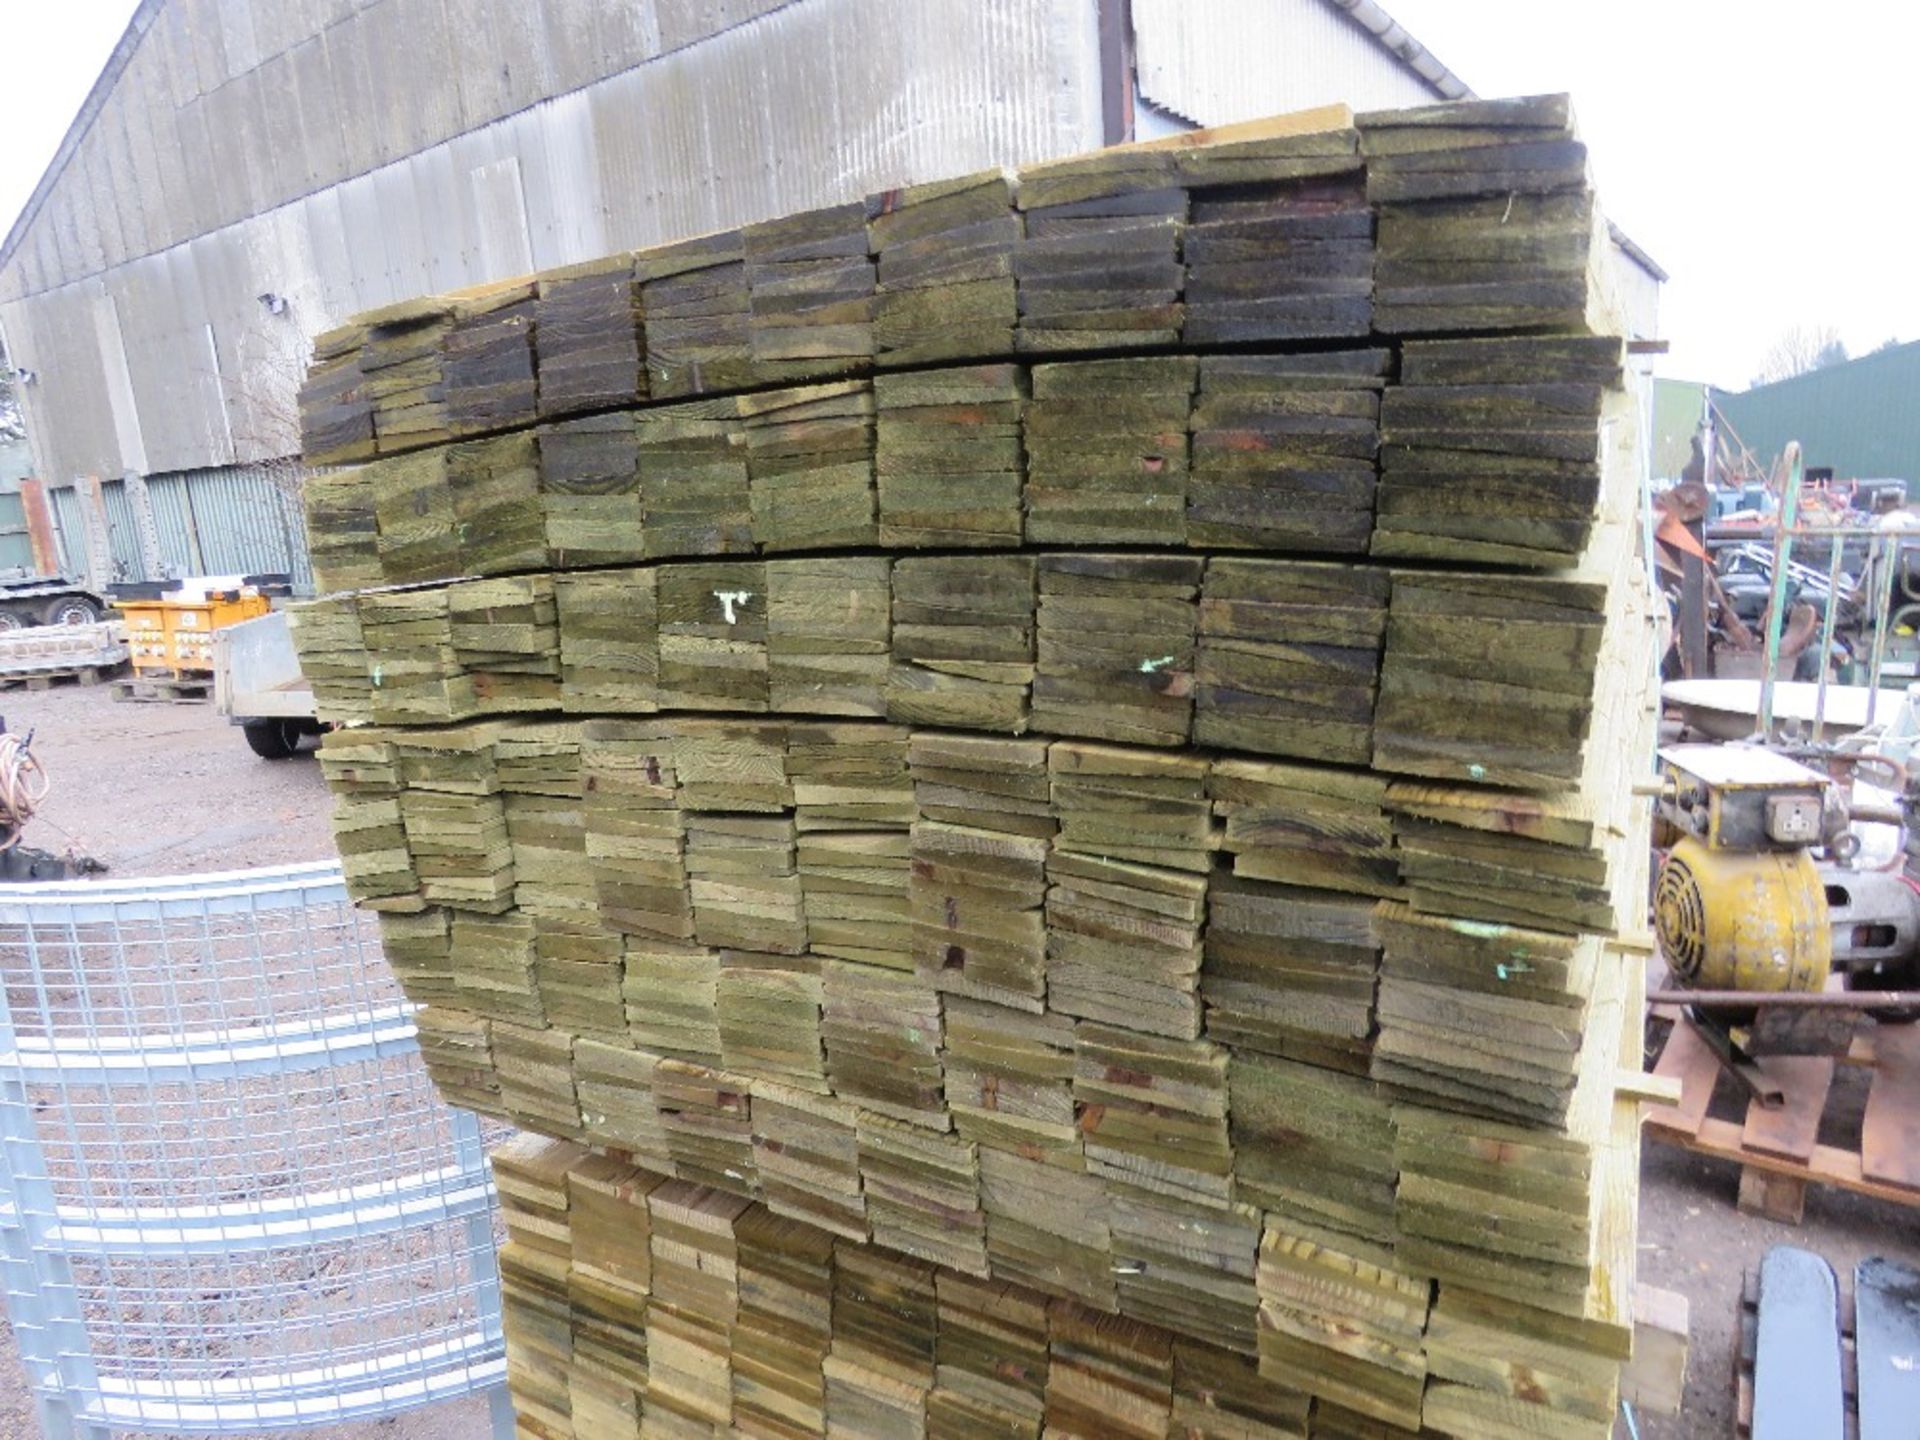 PACK OF PRESSURE TREATED FEATHER EDGE TIMBER CLADDING BOARDS: 1.35M LENGTH X 100MM WIDTH APPROX. - Image 2 of 3